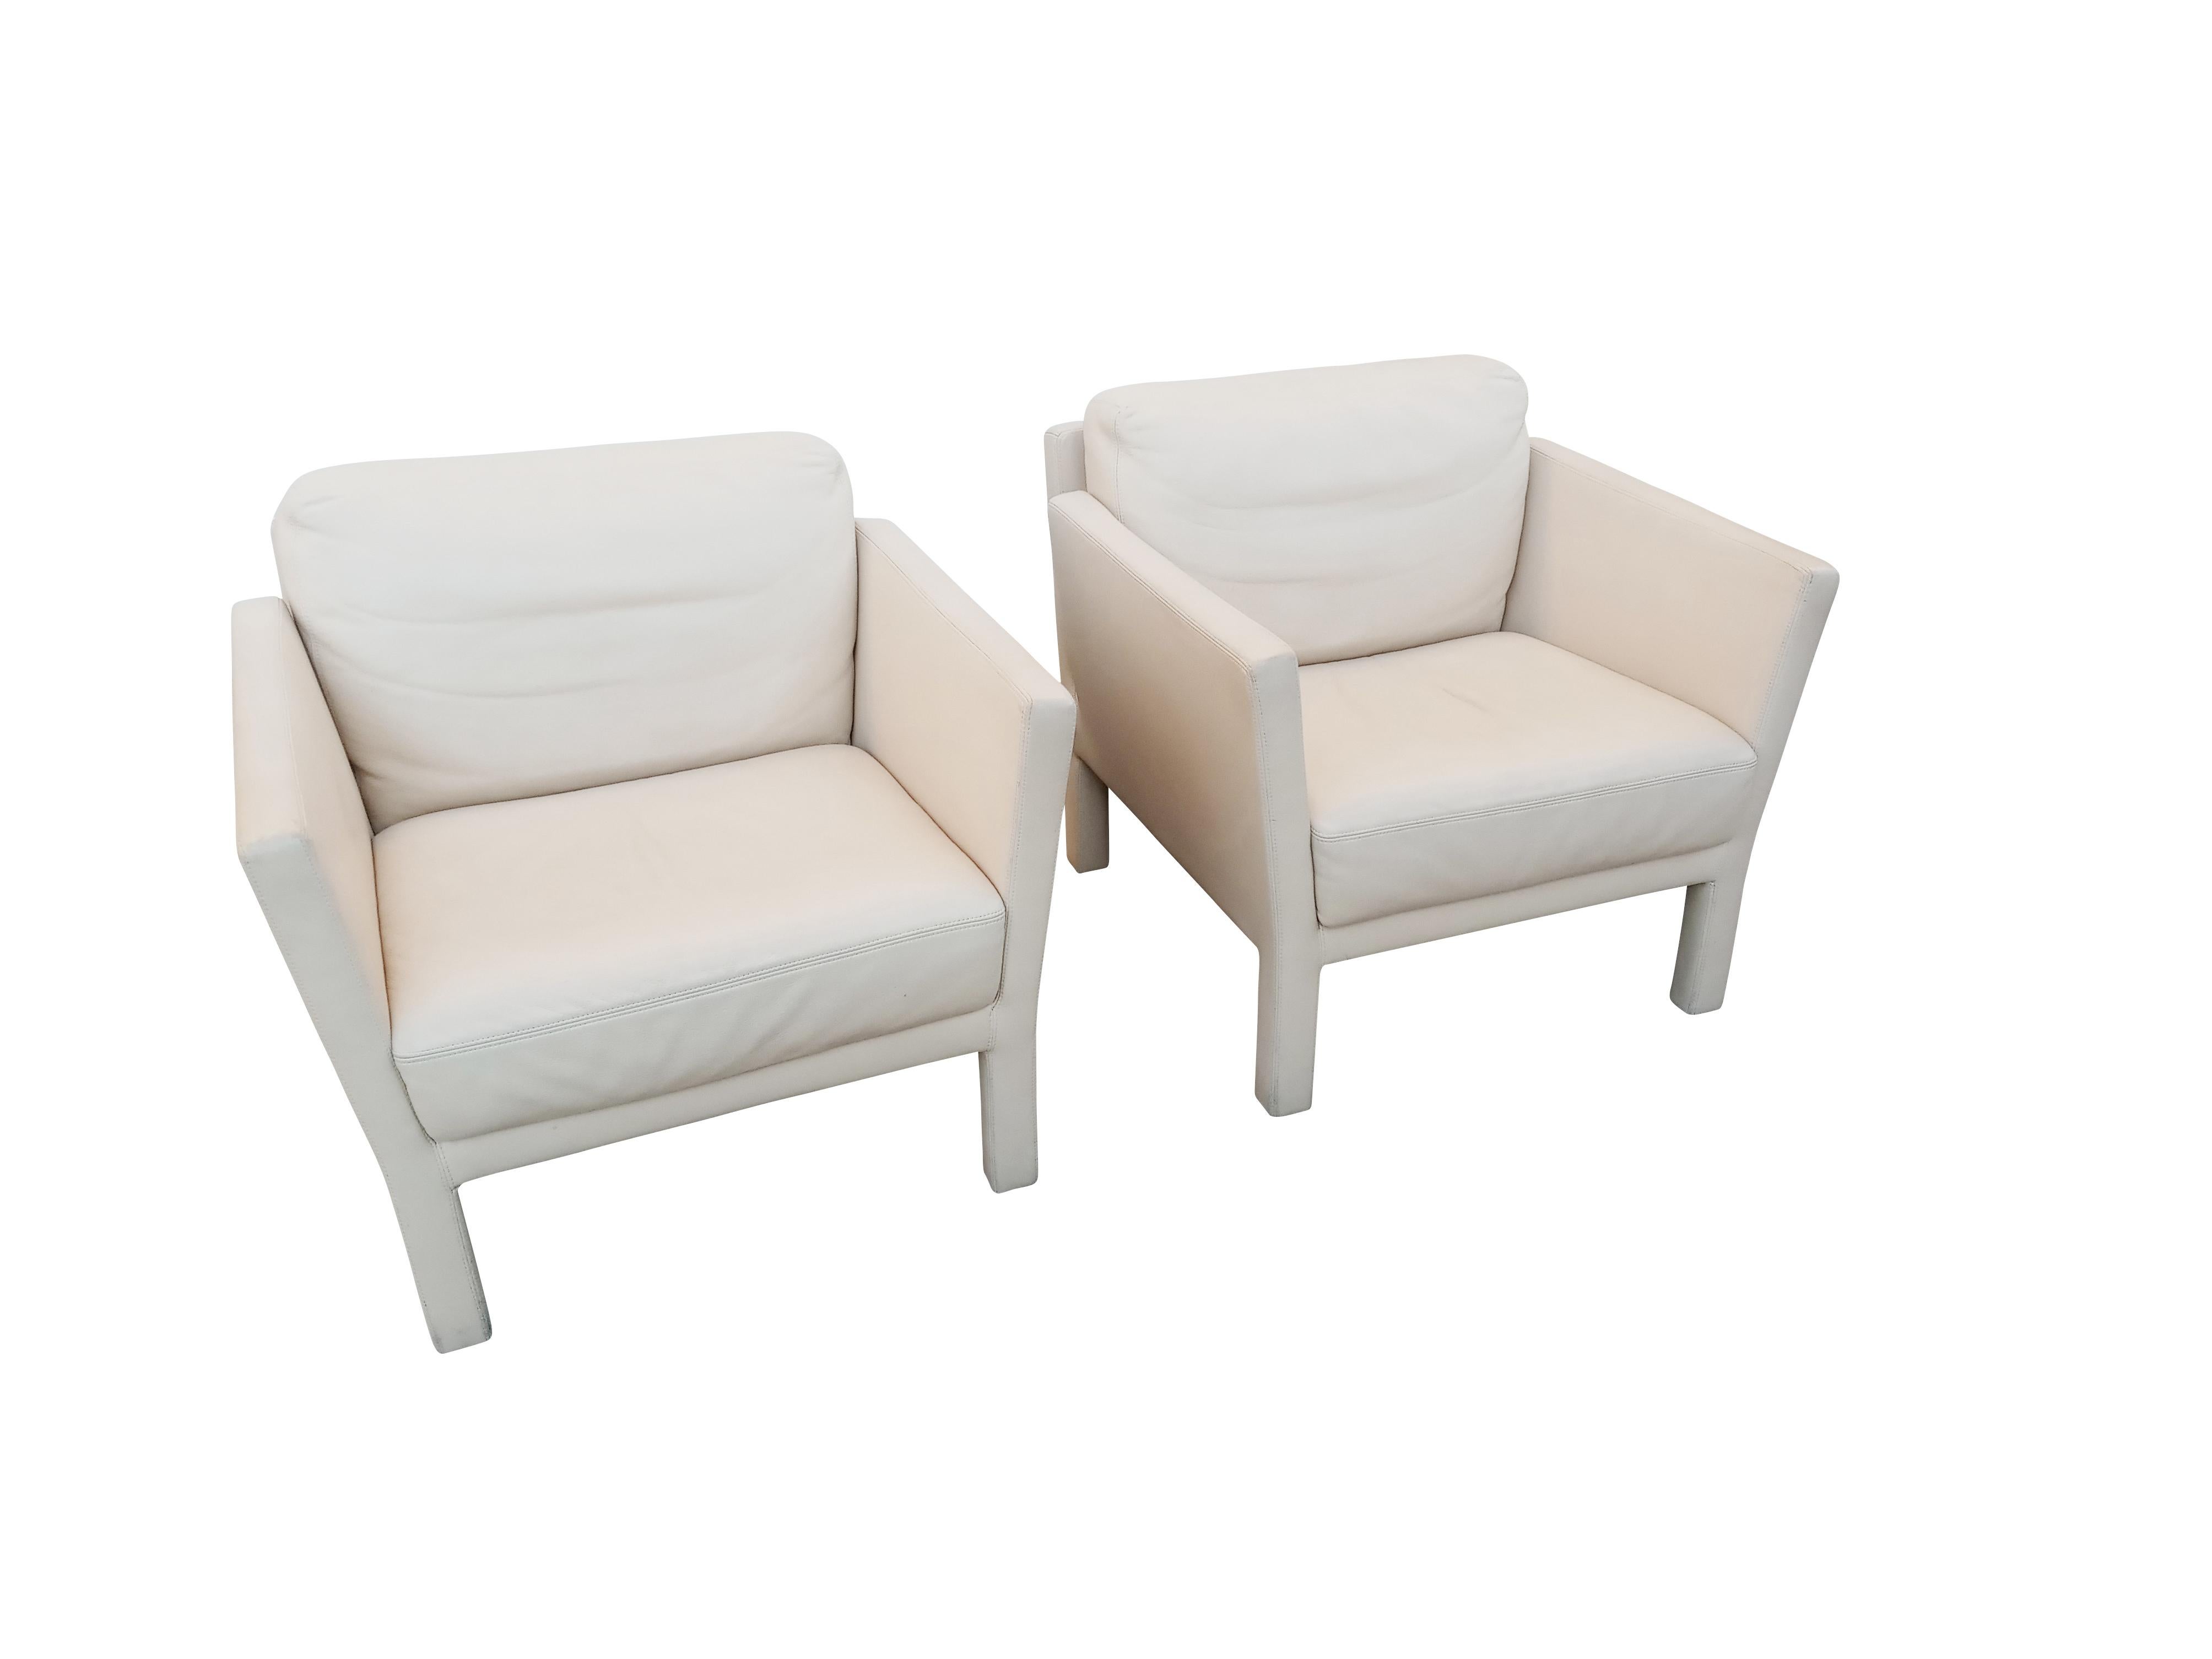 These signed Whittmann chairs are completely clad in ivory white leather. They also have arms that lean and a deliberately designed notch between the back of the arm and the angled backrest. These subtle design cues are likely by the famous